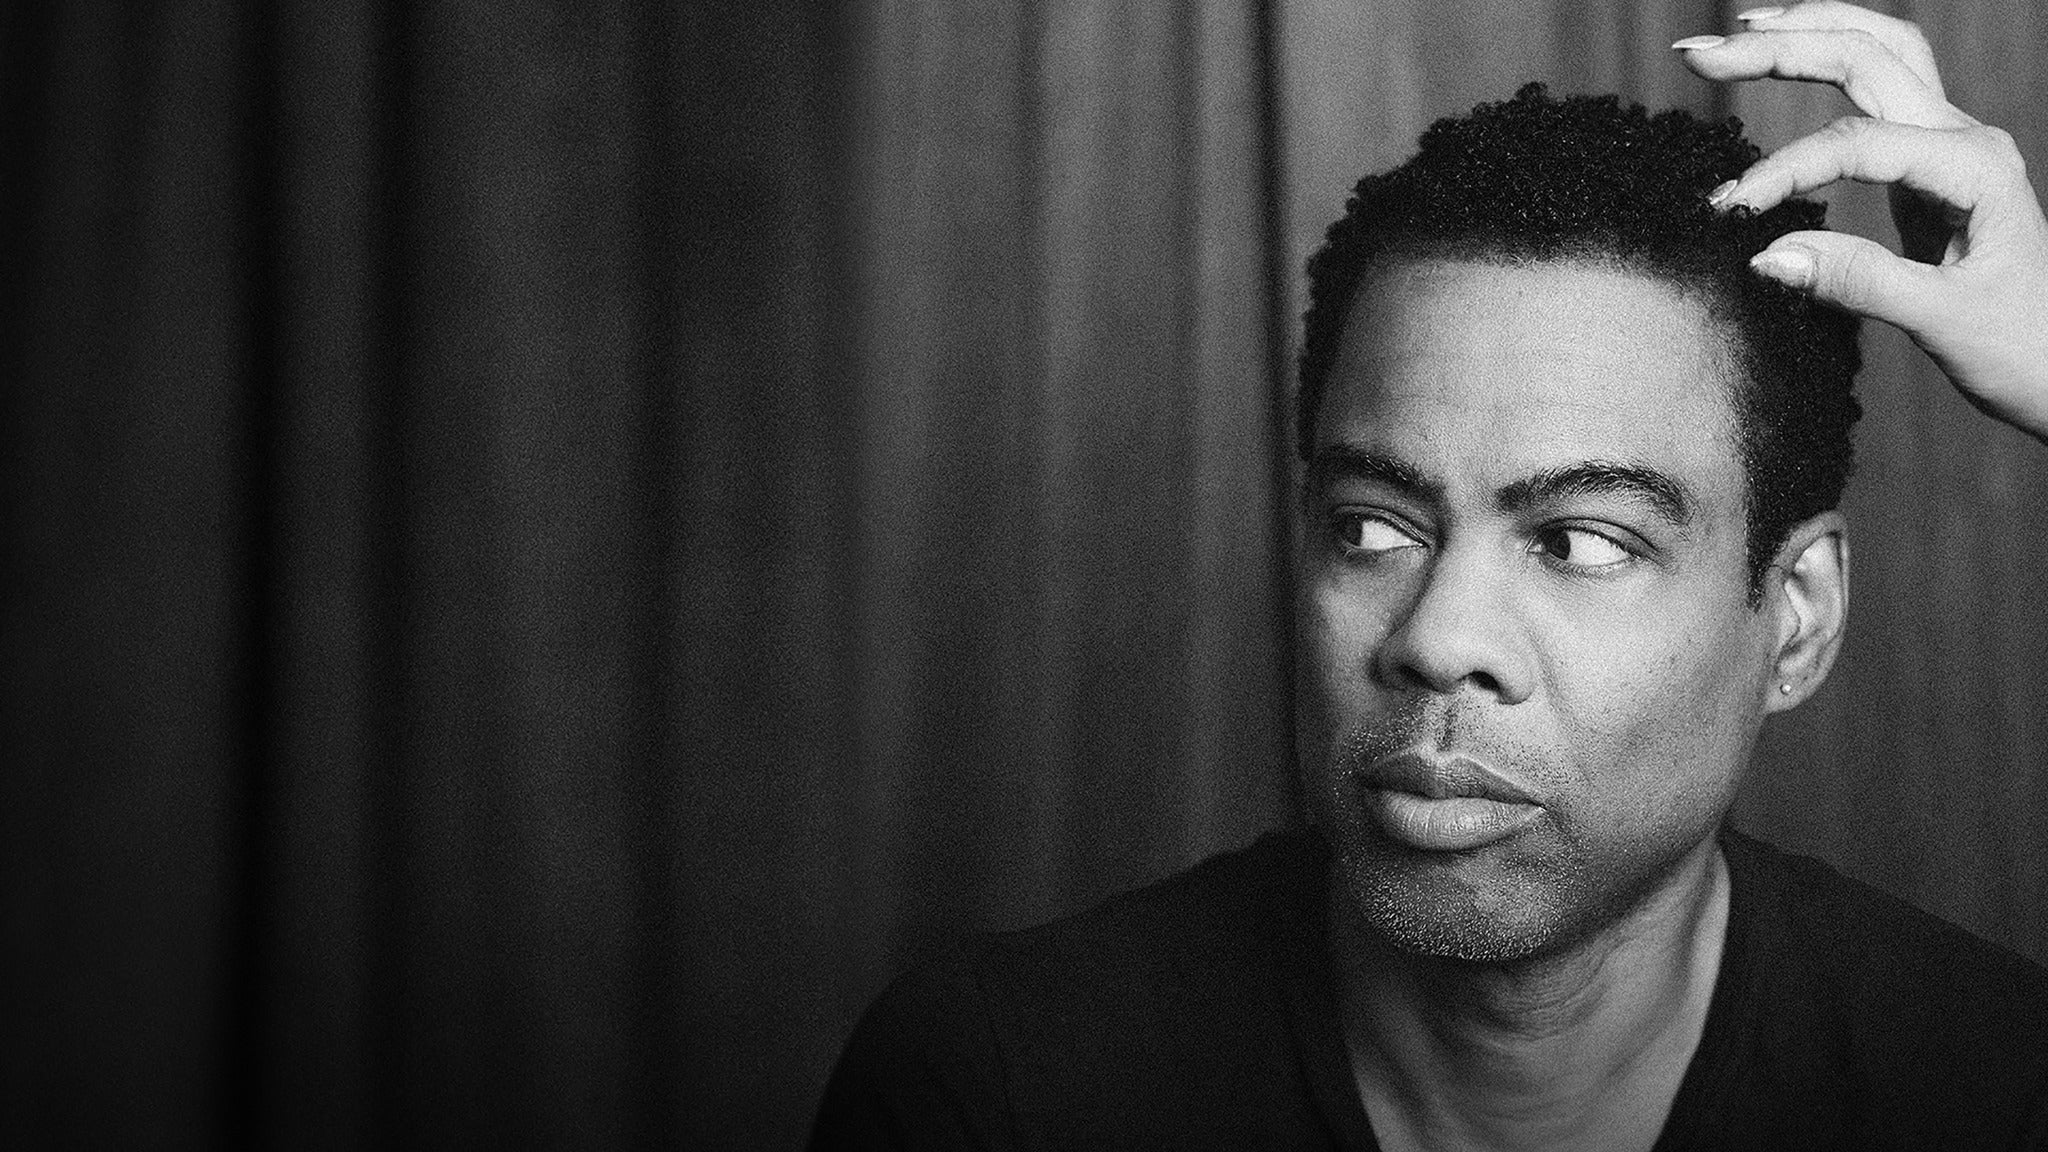 Chris Rock Ego Death World Tour 2023 presale code for early tickets in Knoxville